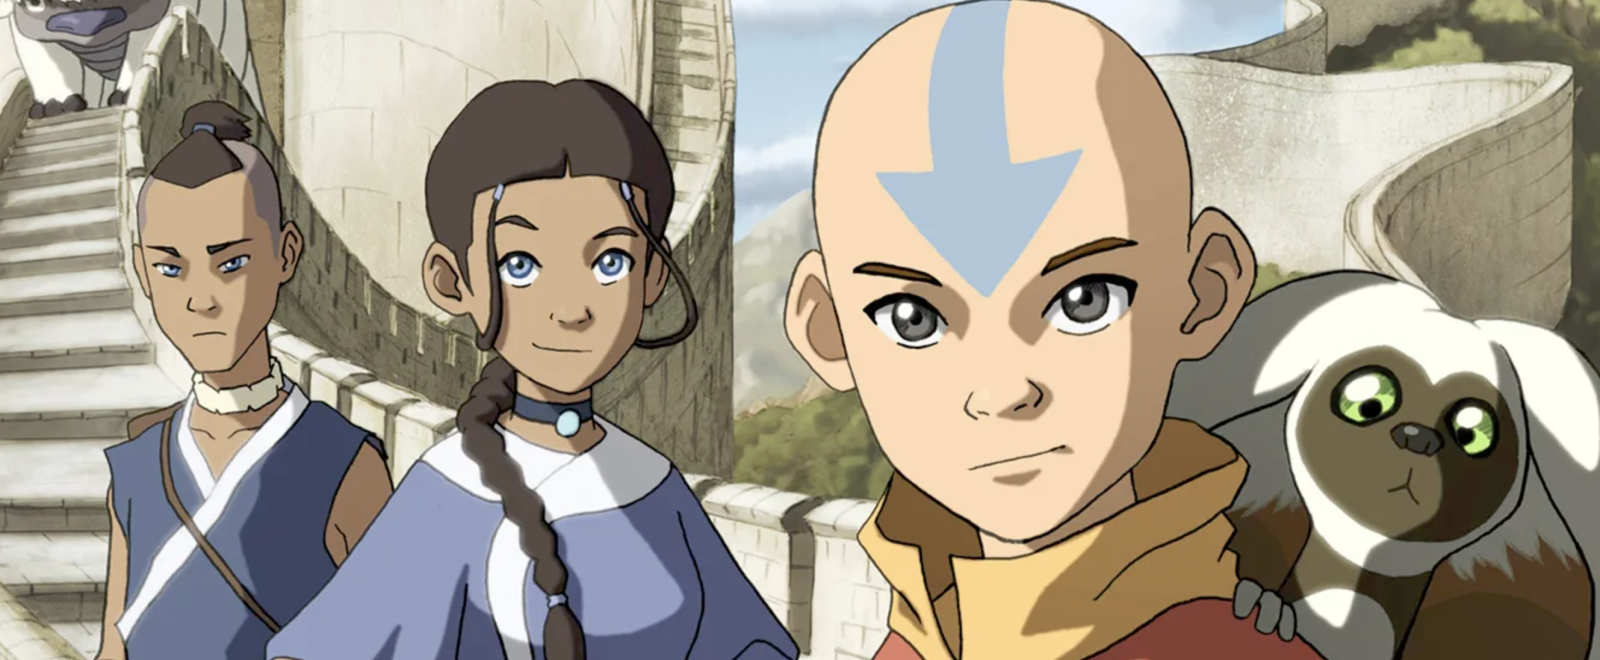 The ‘Avatar: The Last Airbender’ Cast Questions Whether Netflix’s Live-Action Remake Will Be ‘Redundant’